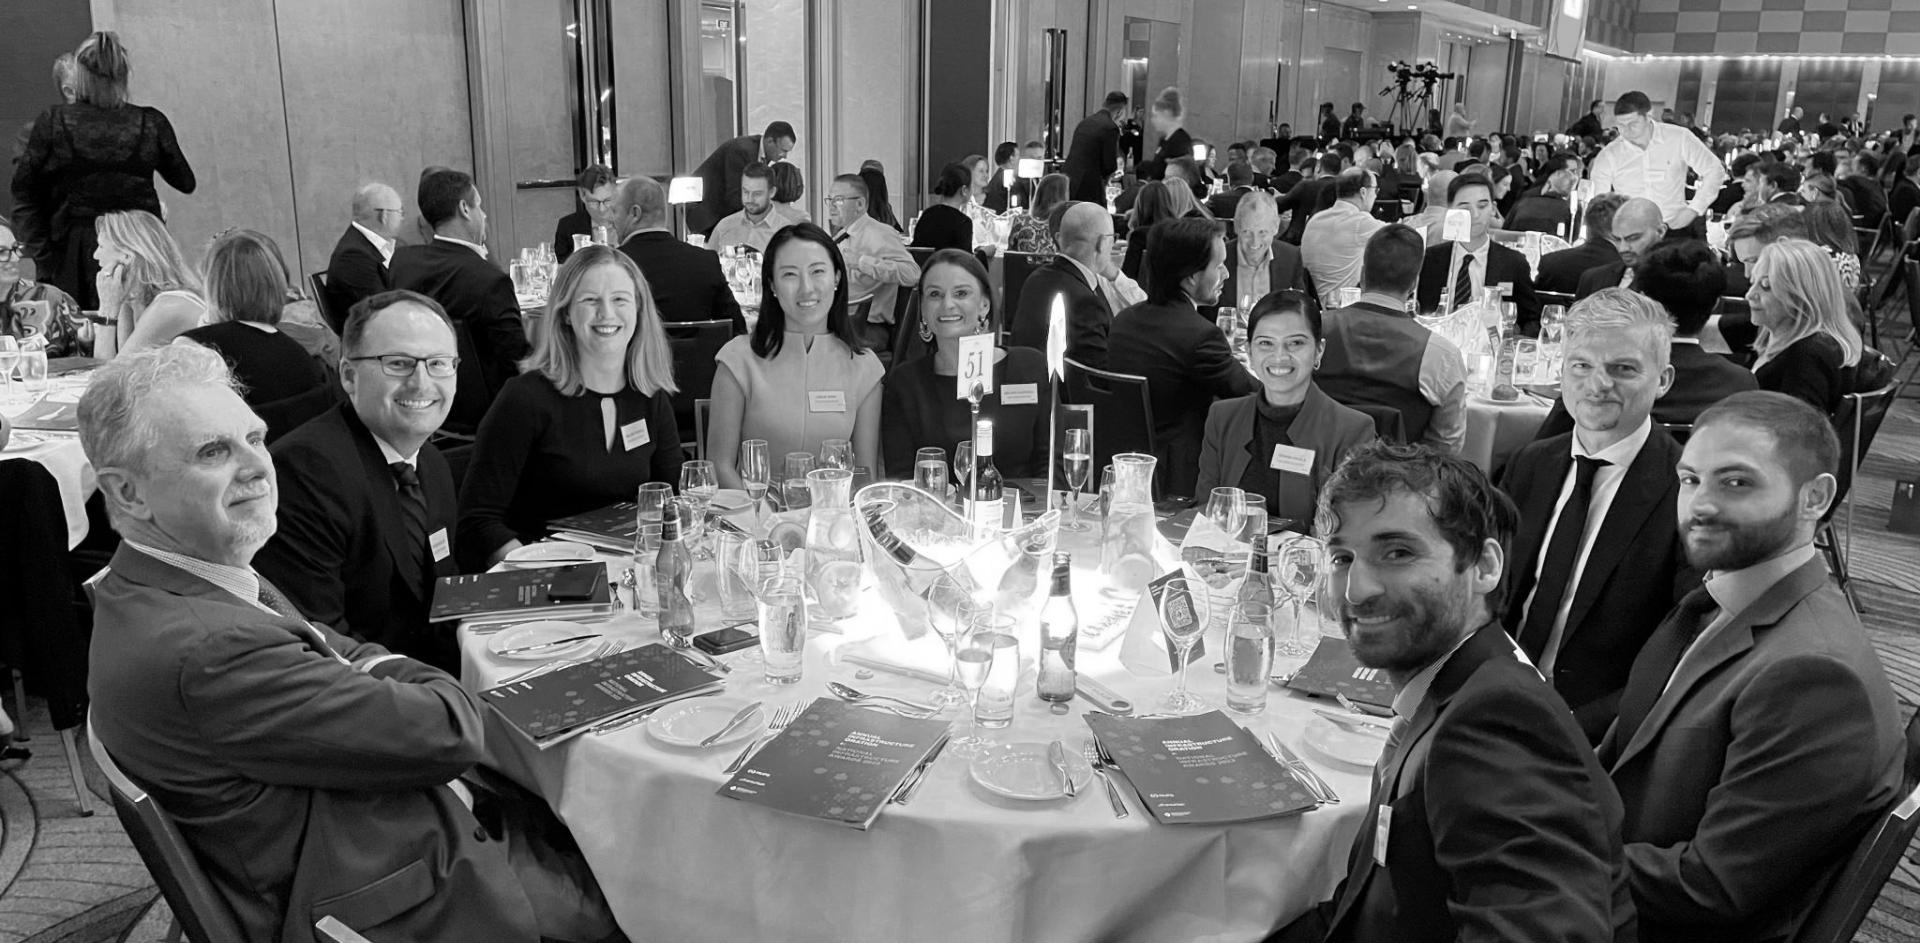 Black and white photograph of a group of people at a conference dinner sitting around a round table smiling